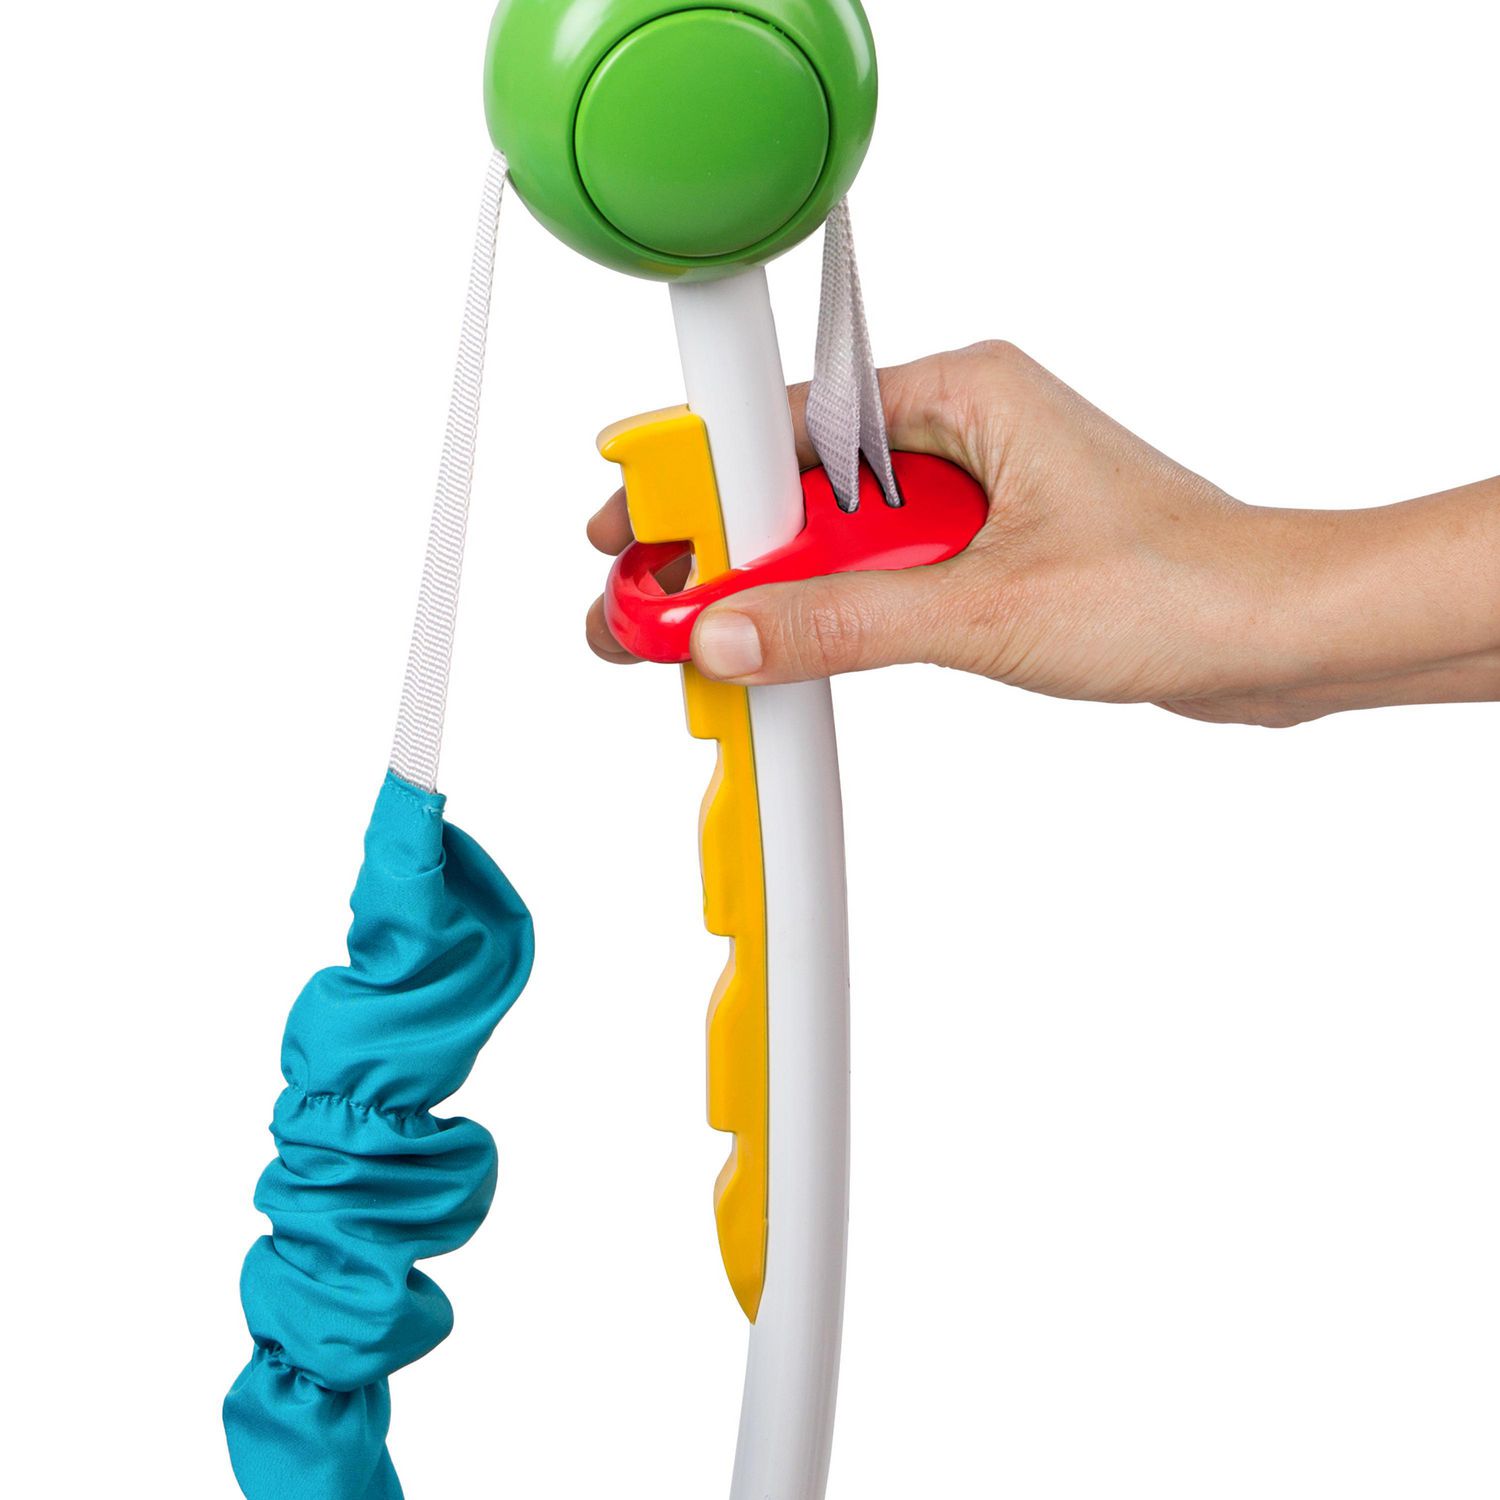 Baby Einstein - Neptune's Ocean Discovery Jumper - Bouncer and 360 Degree  Swivel Seat